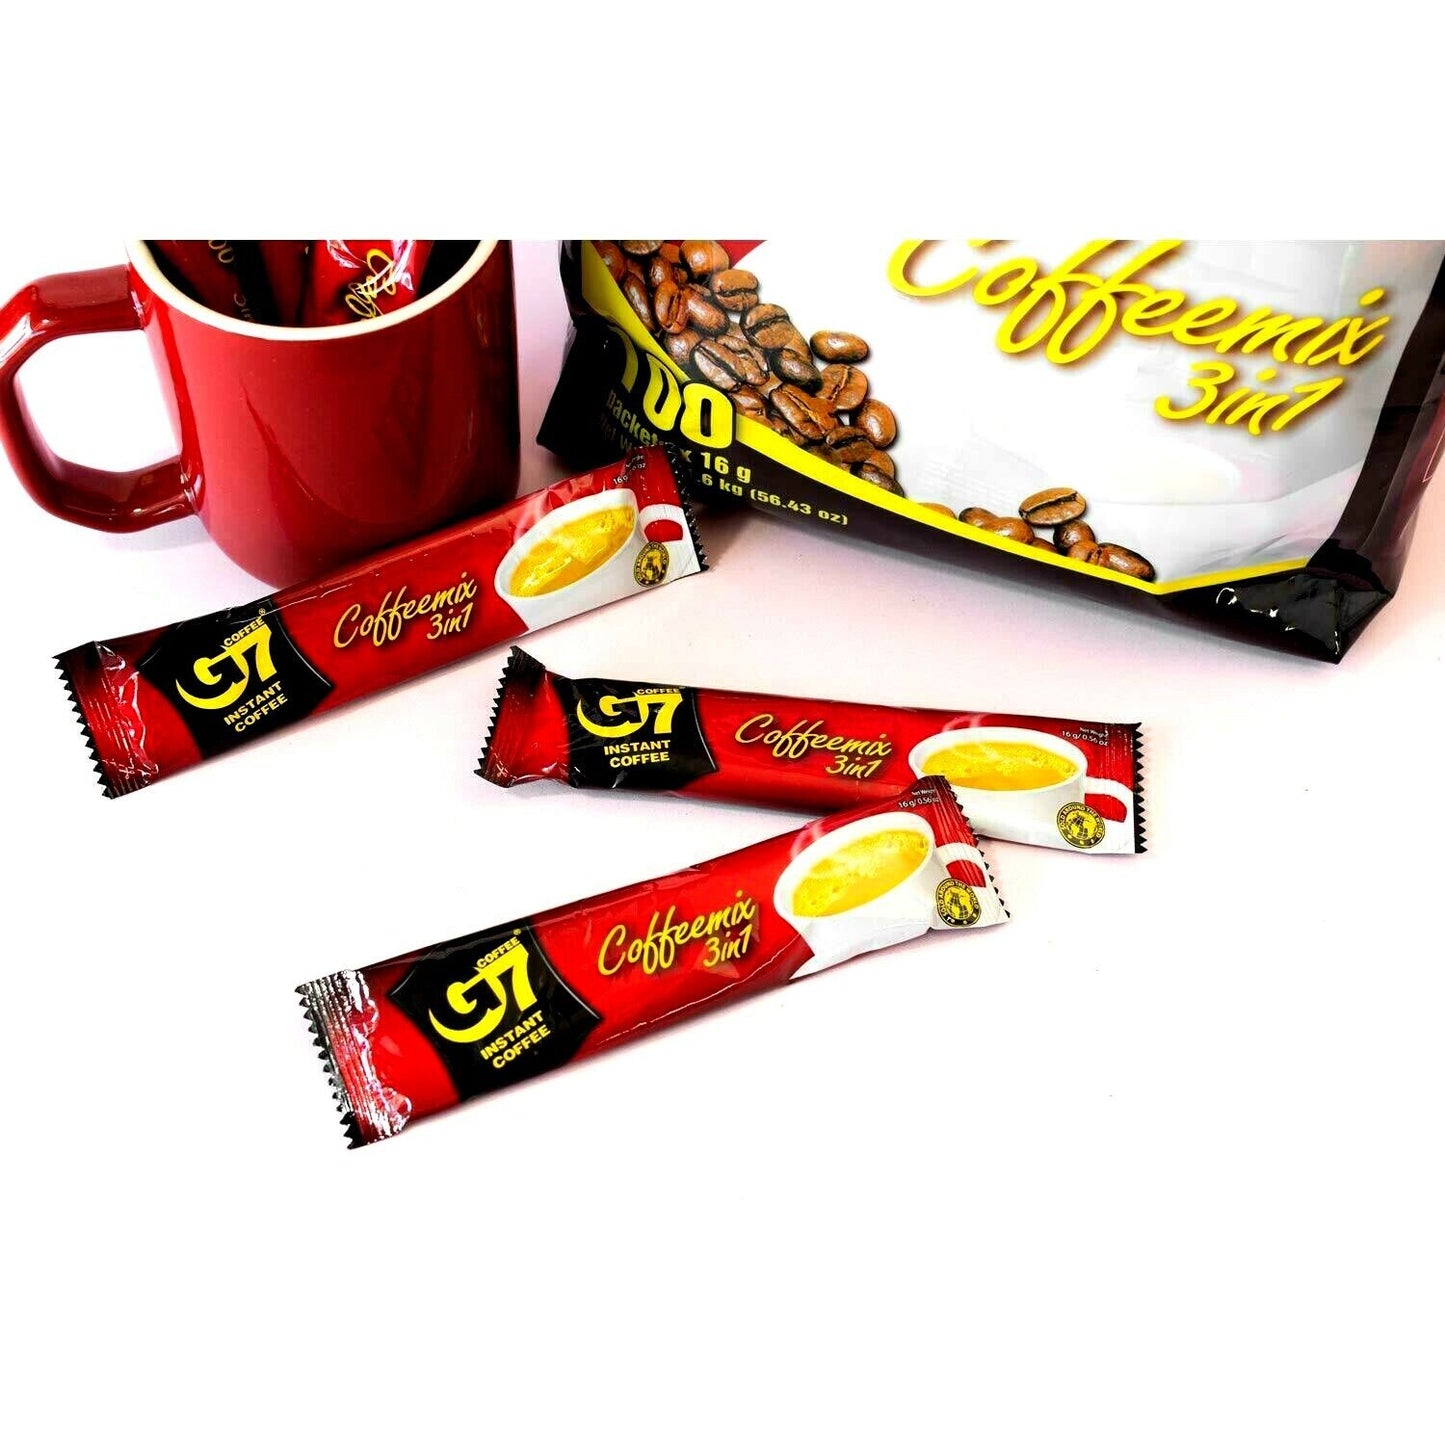 Trung Nguyen G7 3In1 Instant Coffee Viet Nam 21/ 50/ 100 Packets VietsWay Seller